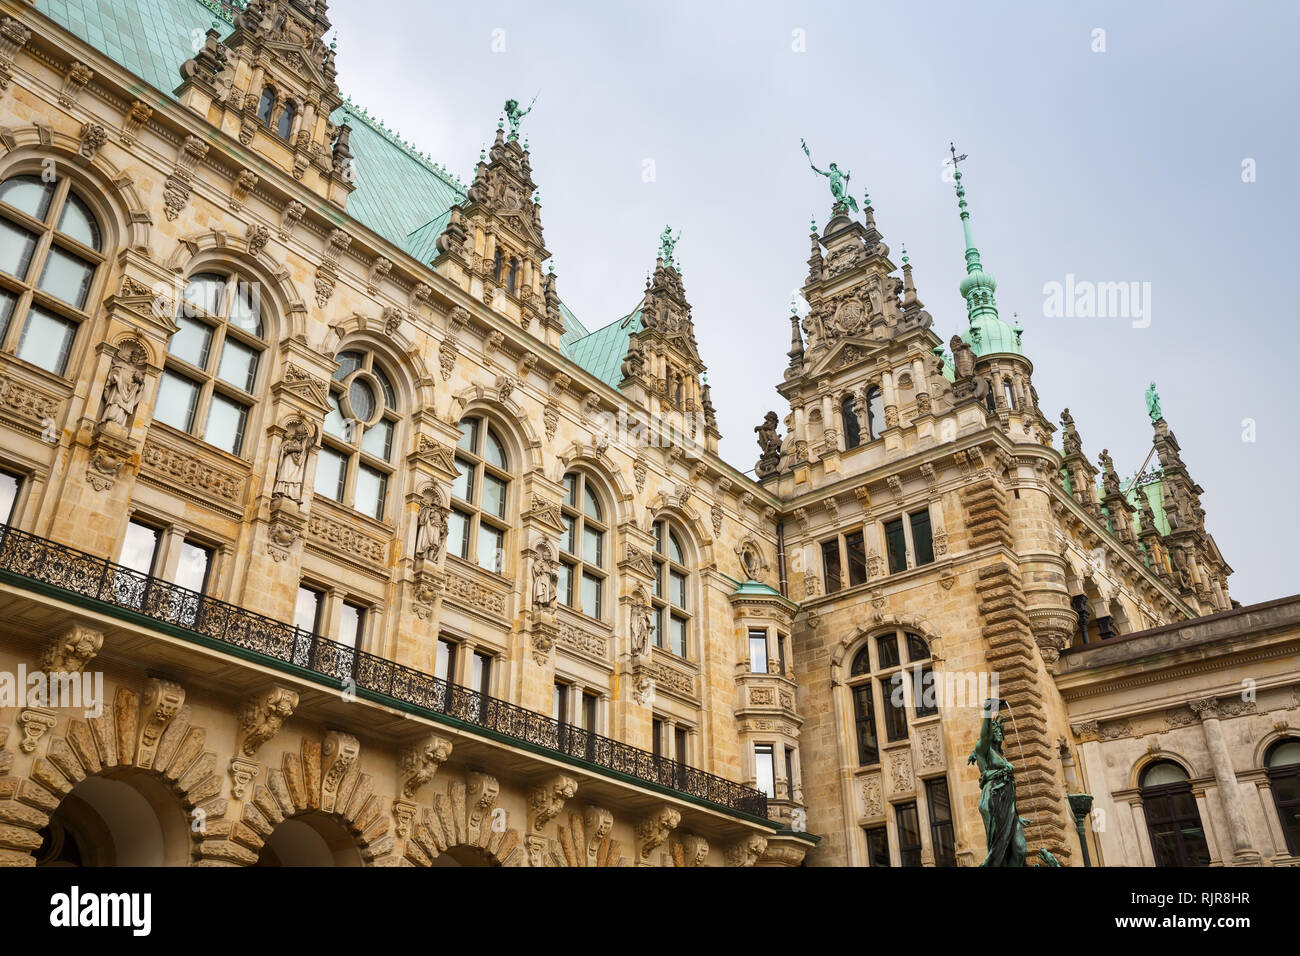 The statue of Hygieia the goddess of health and hygiene n the courtyard of Hamburg City Hall (Rathaus), Germany. Stock Photo